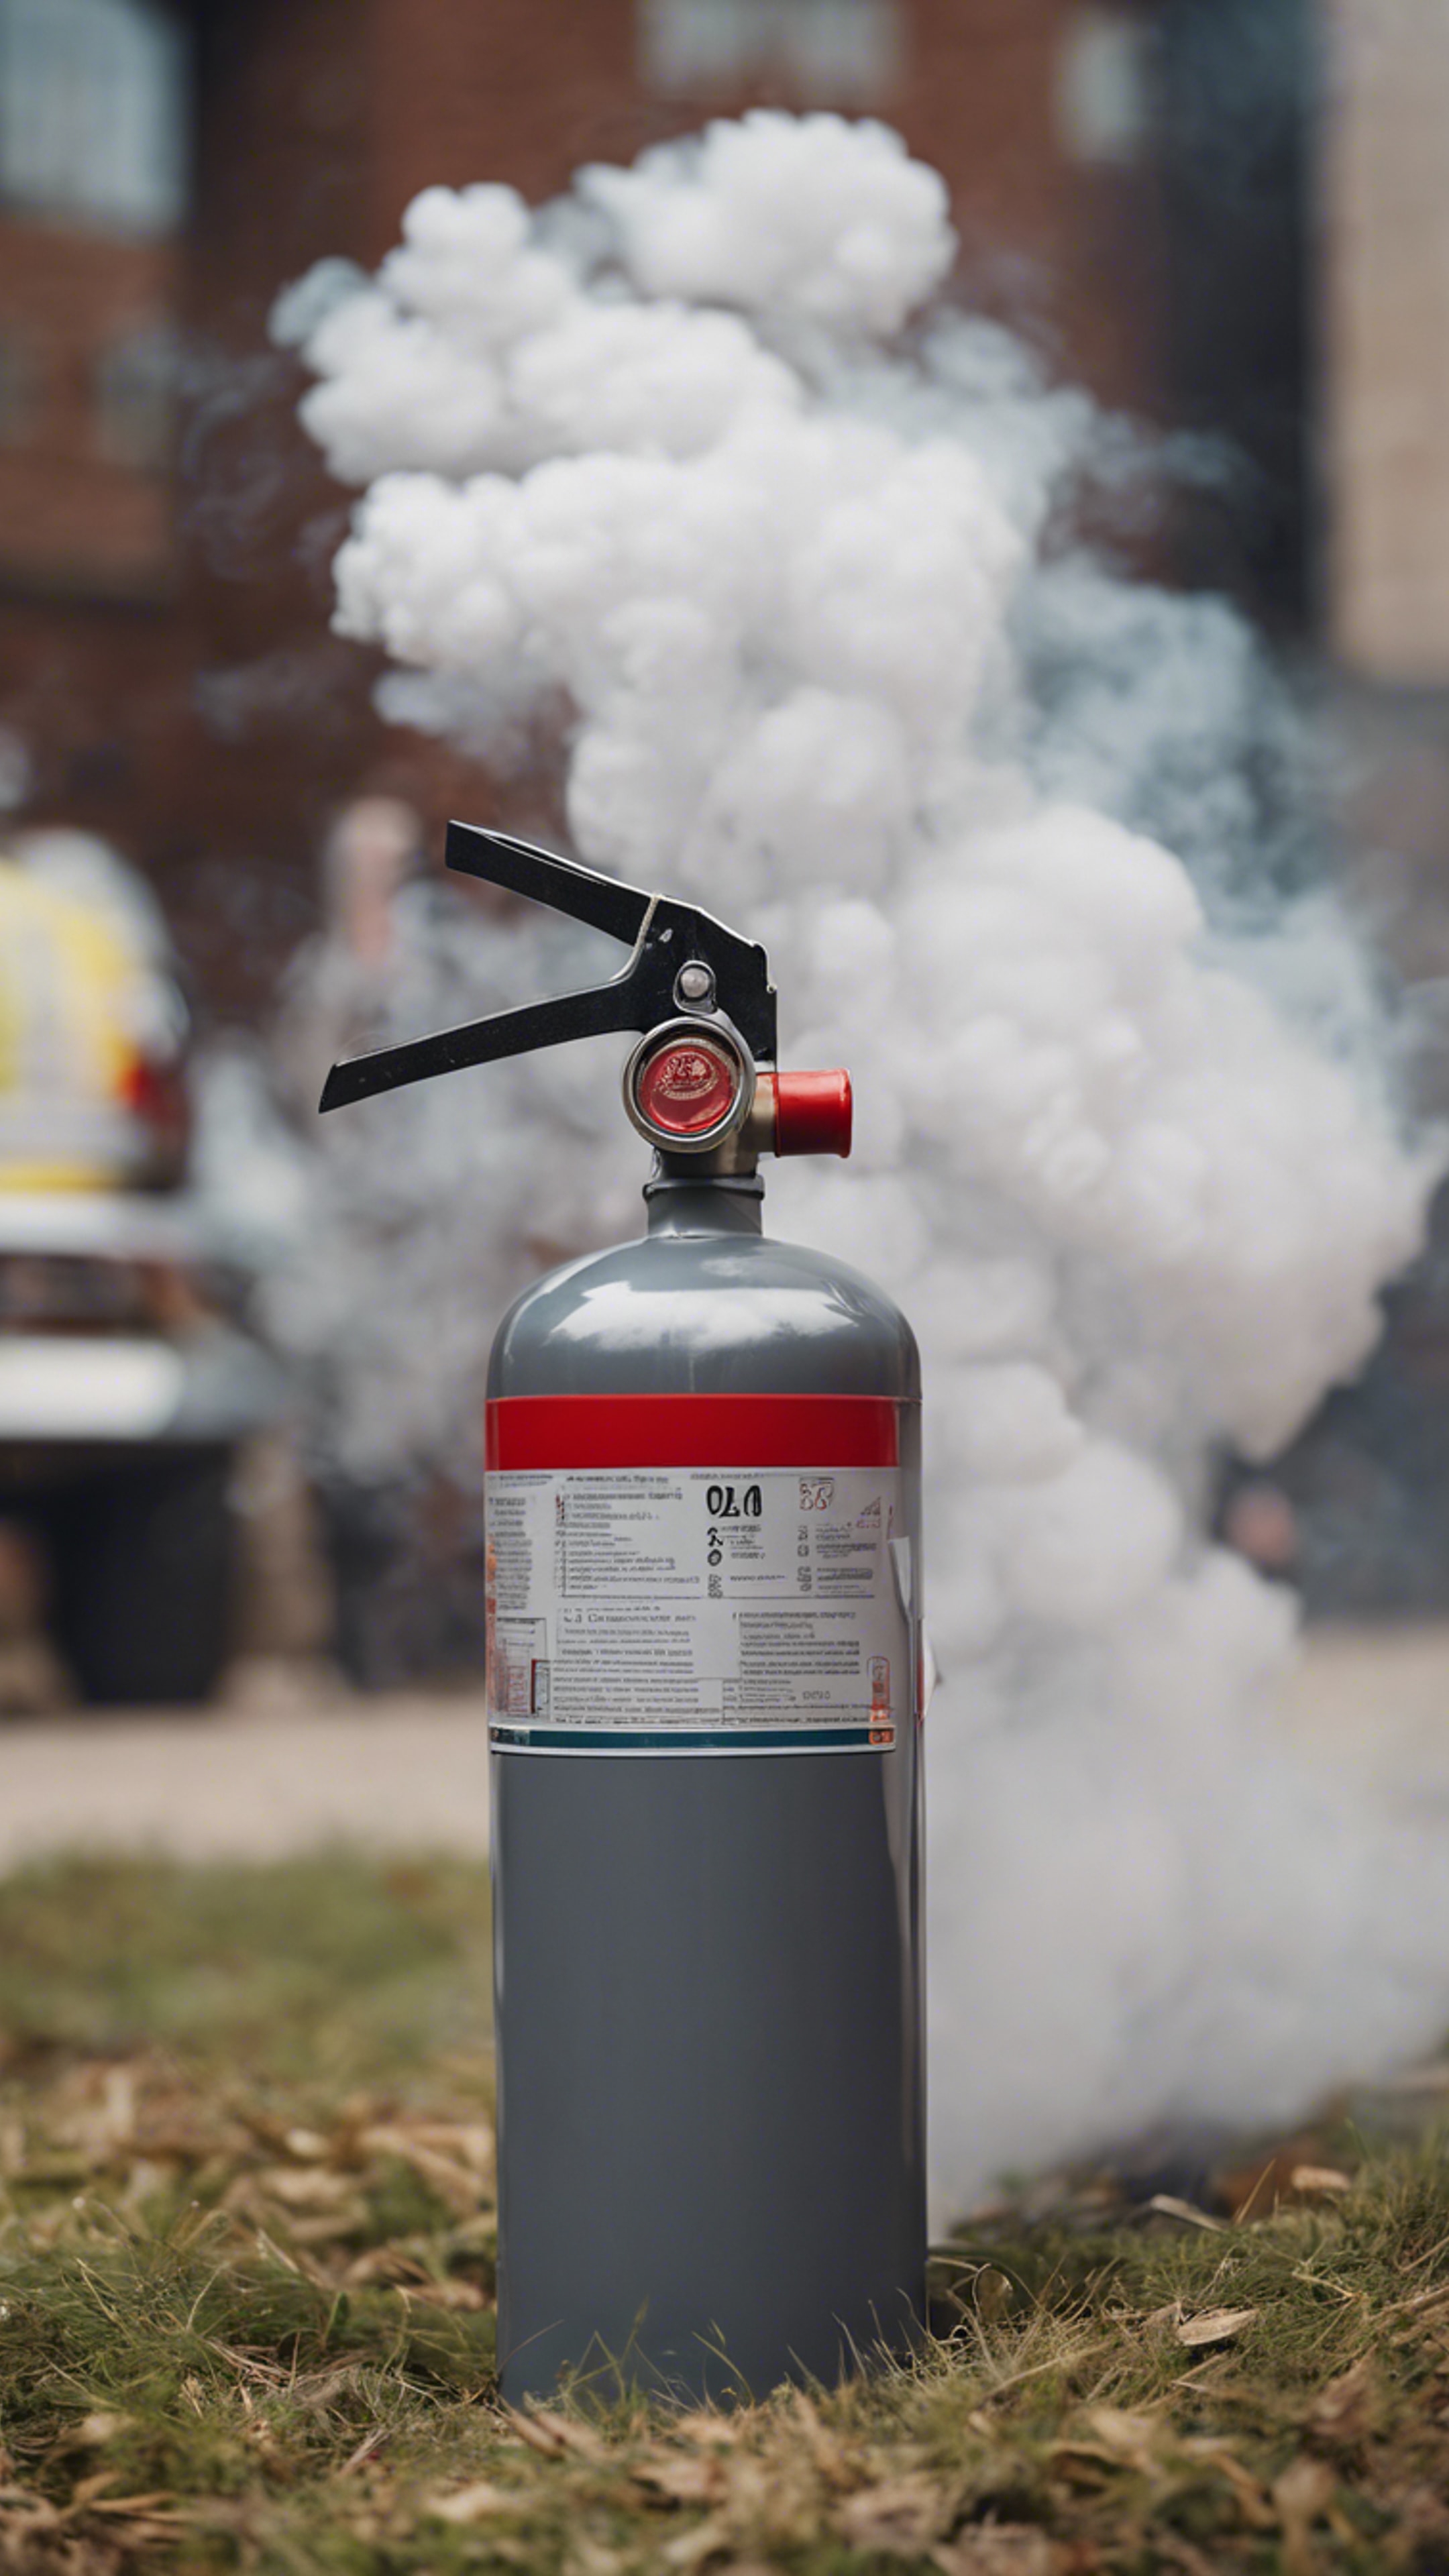 A fire extinguisher releasing a cloud of grey smoke during a fire drill.壁紙[83ab369e14f84a2aa2fc]